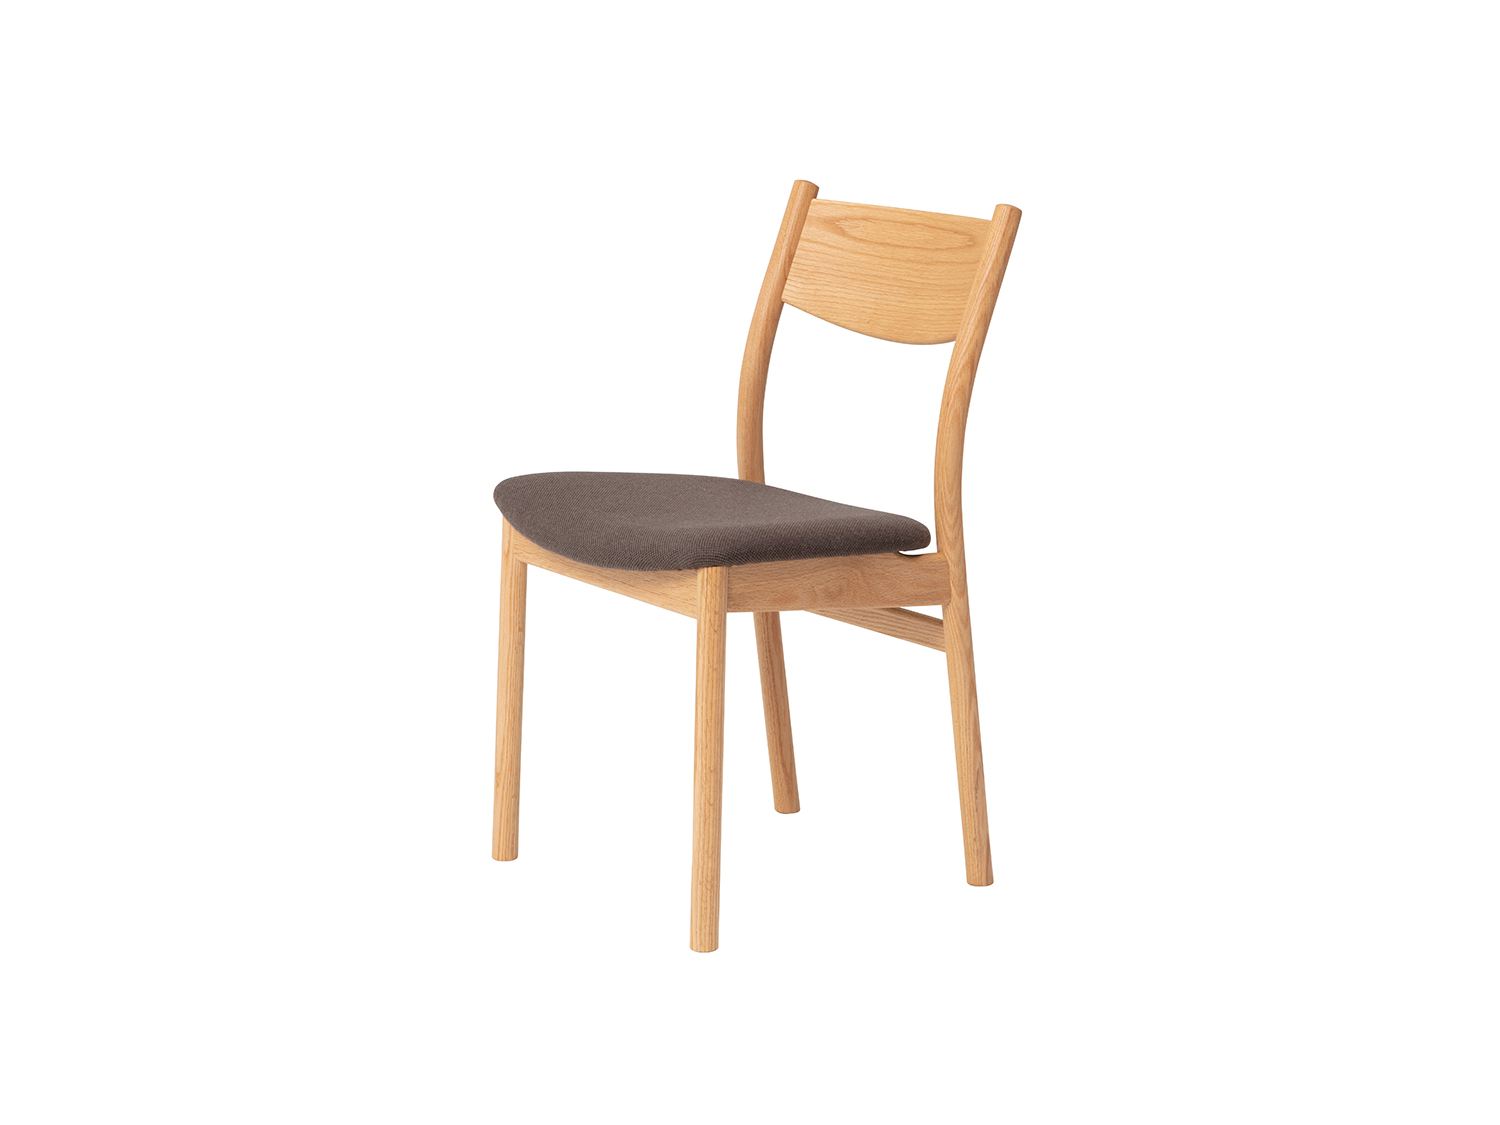 SOUP DINING CHAIR TYPE B（スープ ダイニングチェア タイプB） - ACTUS